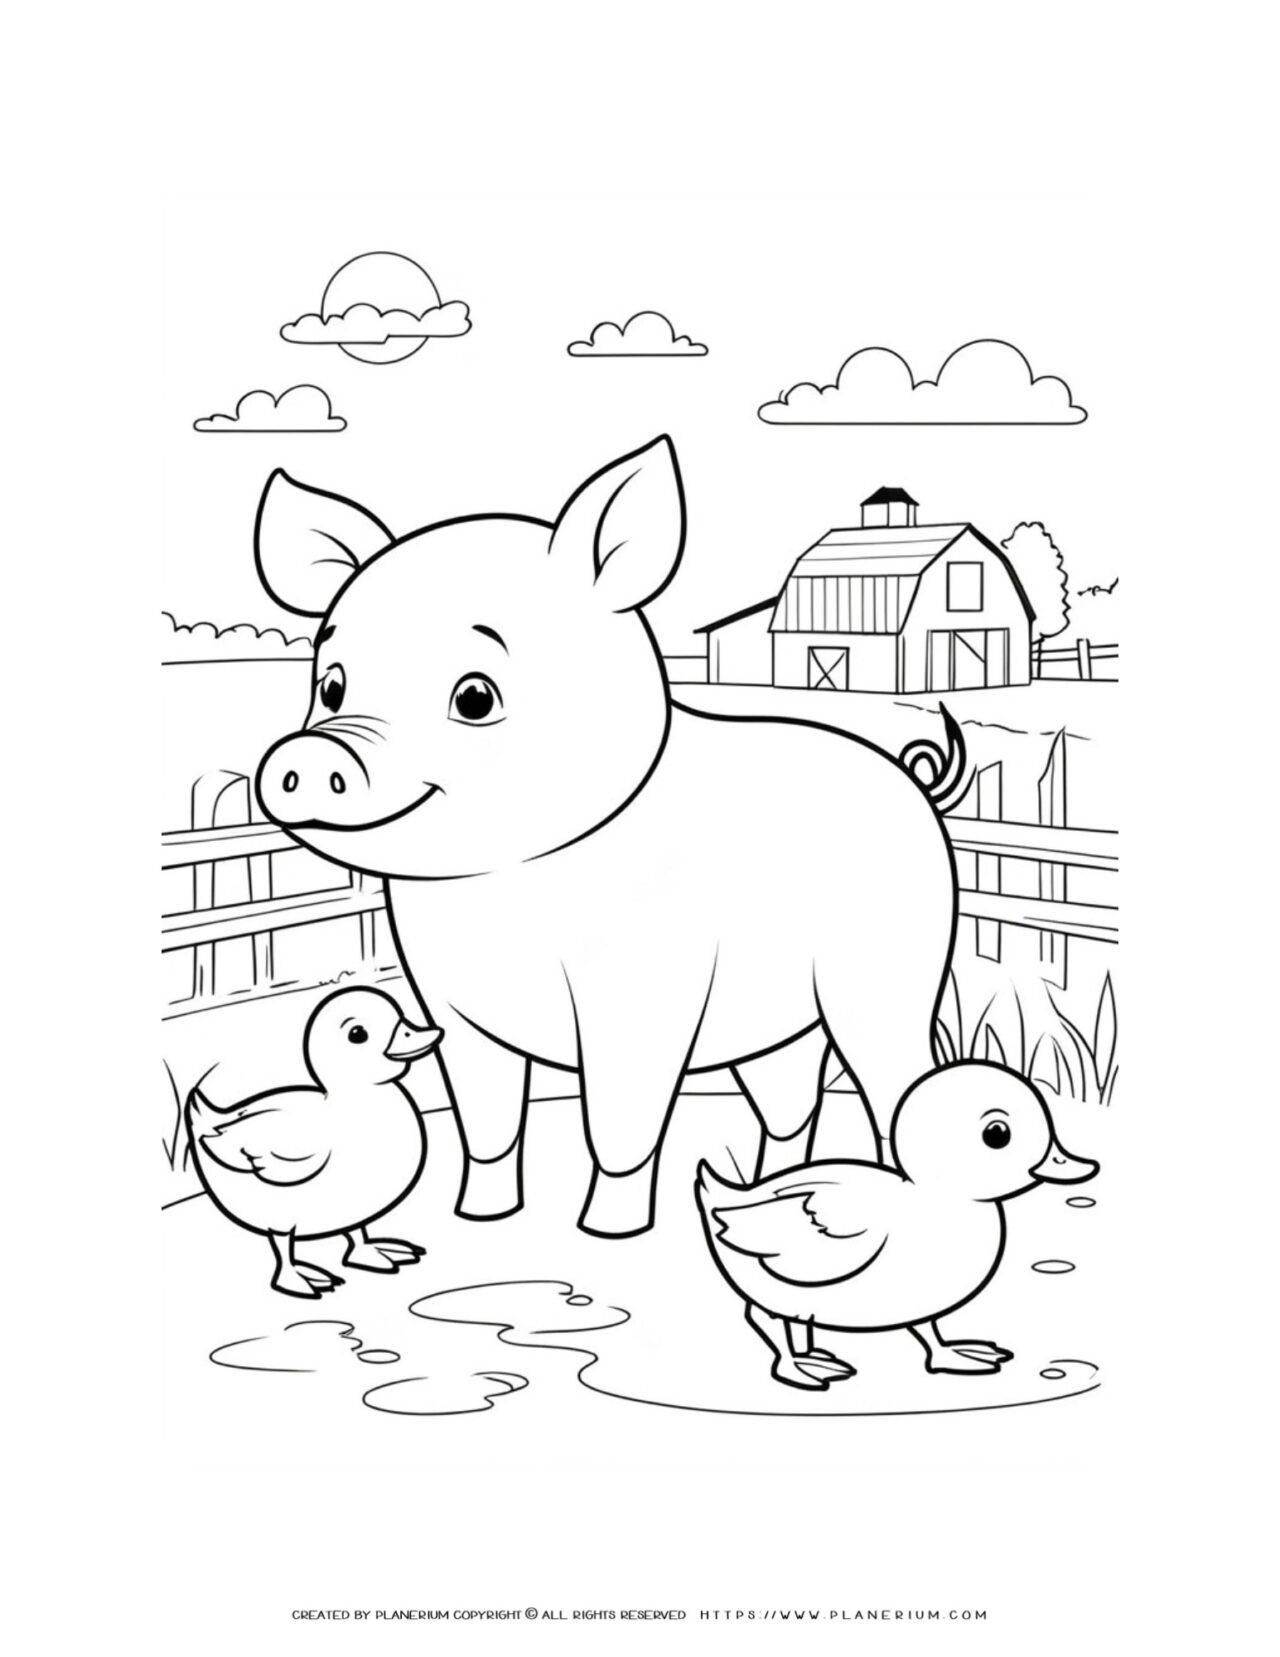 three-farm-animals-pig-and-ducks-coloring-page-for-kids